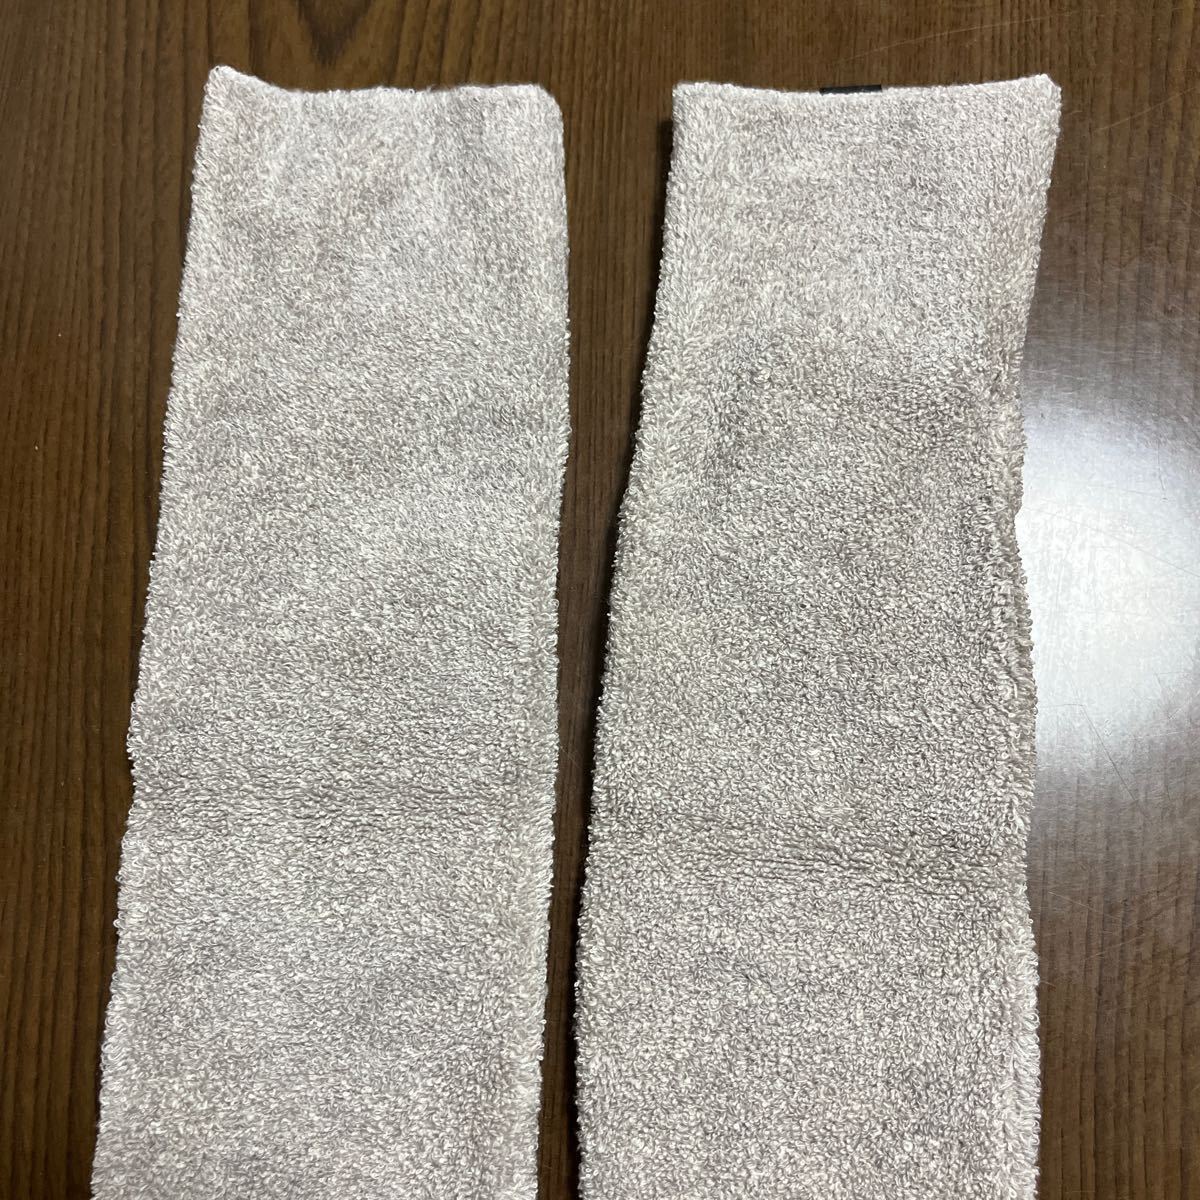 602p1937* [mi-te] mite leg warmers men's lady's made in Japan for summer winter tighten attaching not gap not ... is . for protection against cold cold-protection 